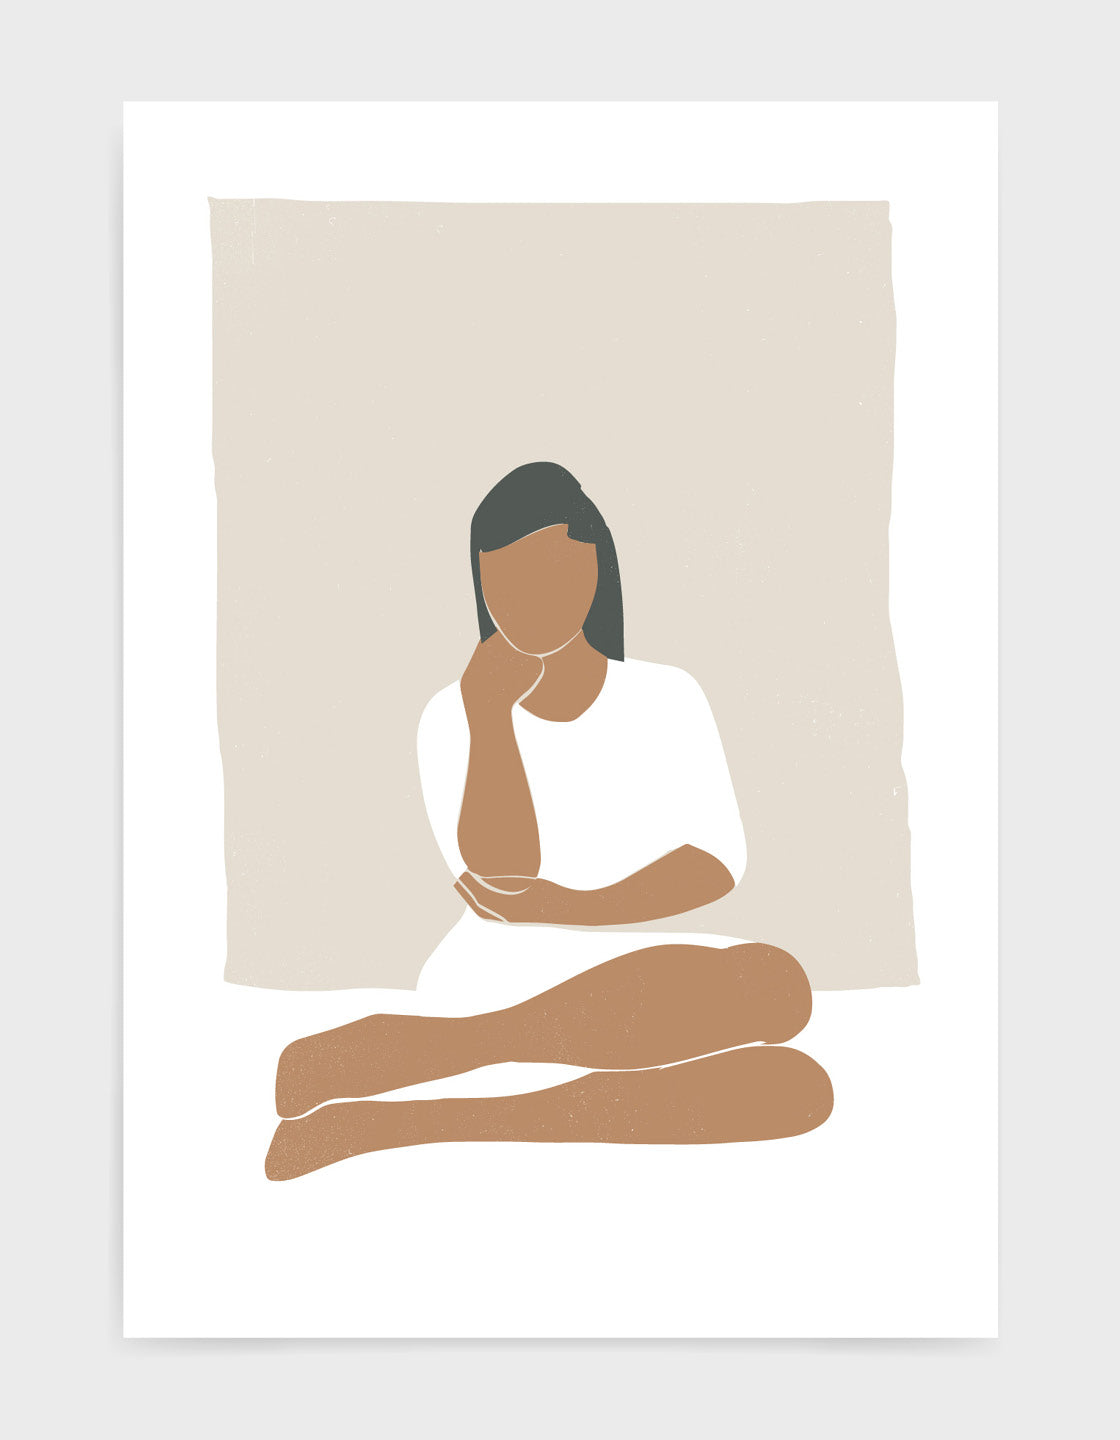 Abstract art print of woman in muted tones sitting with knees to one side and hand on chin